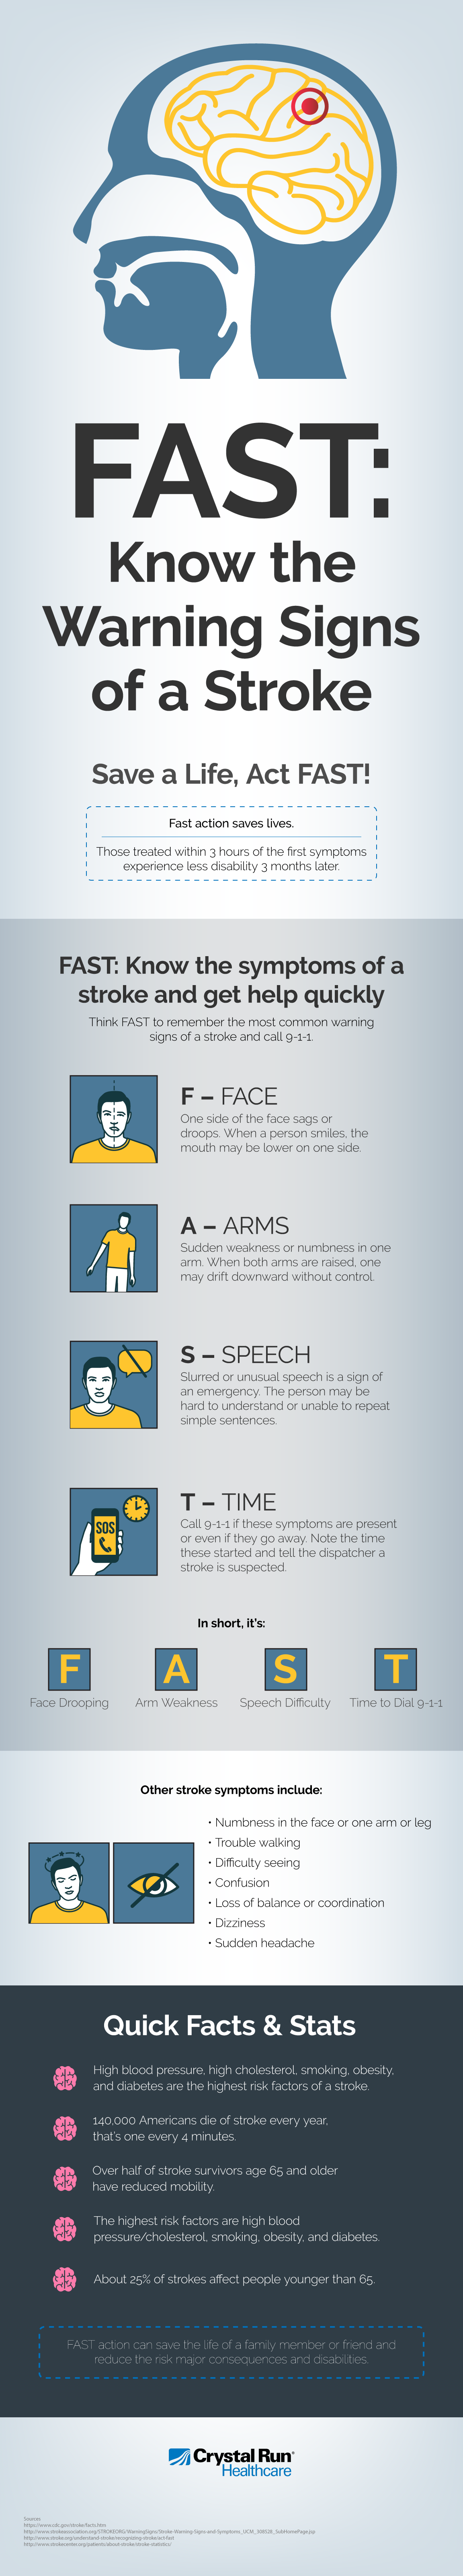 Warning Signs of a Stroke Infographic